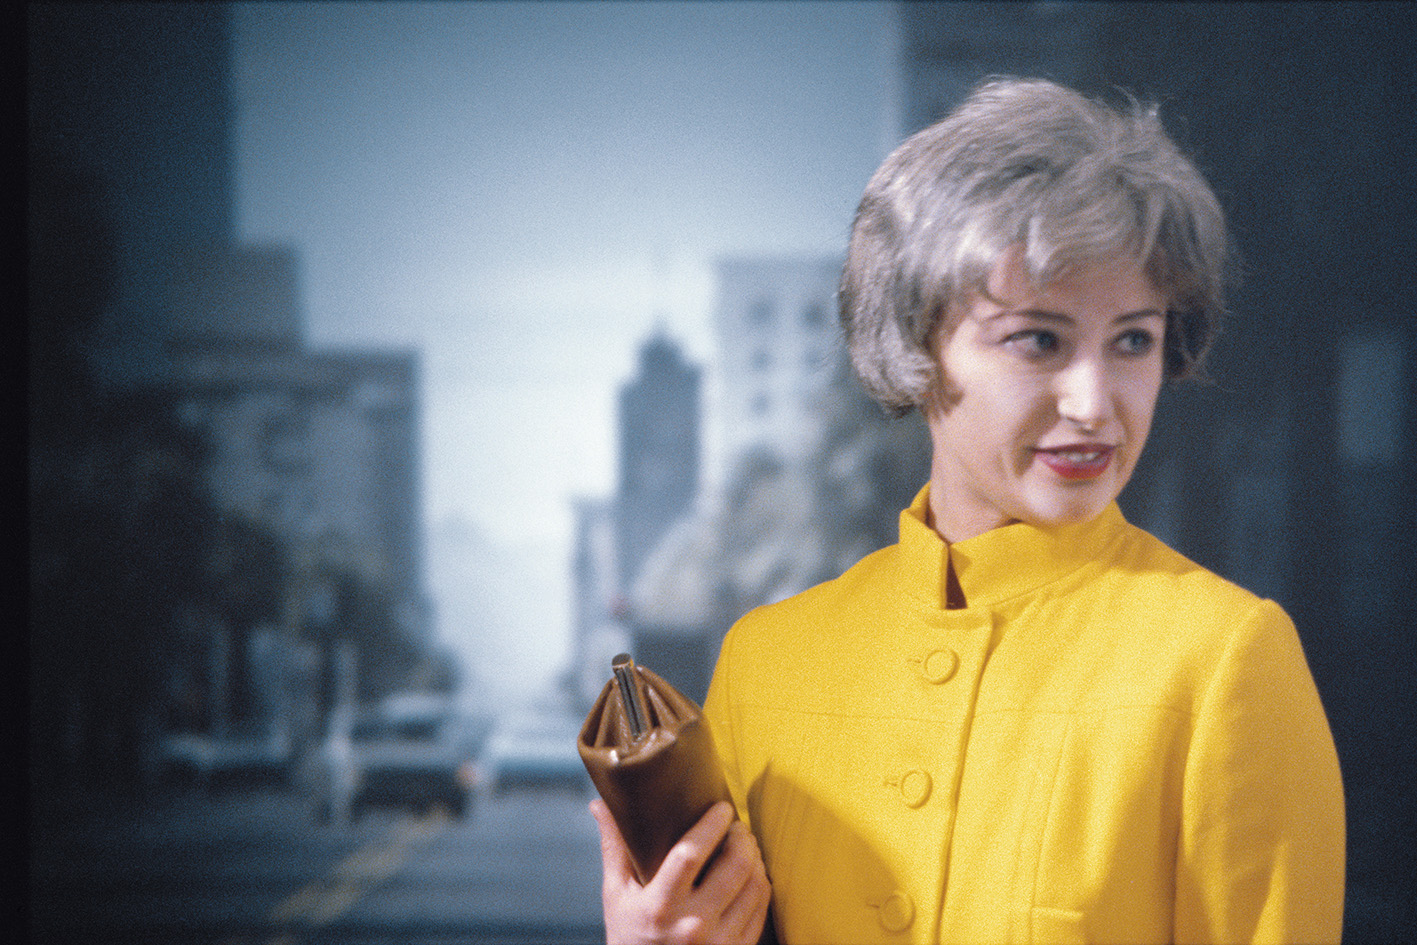 famous cindy sherman photography